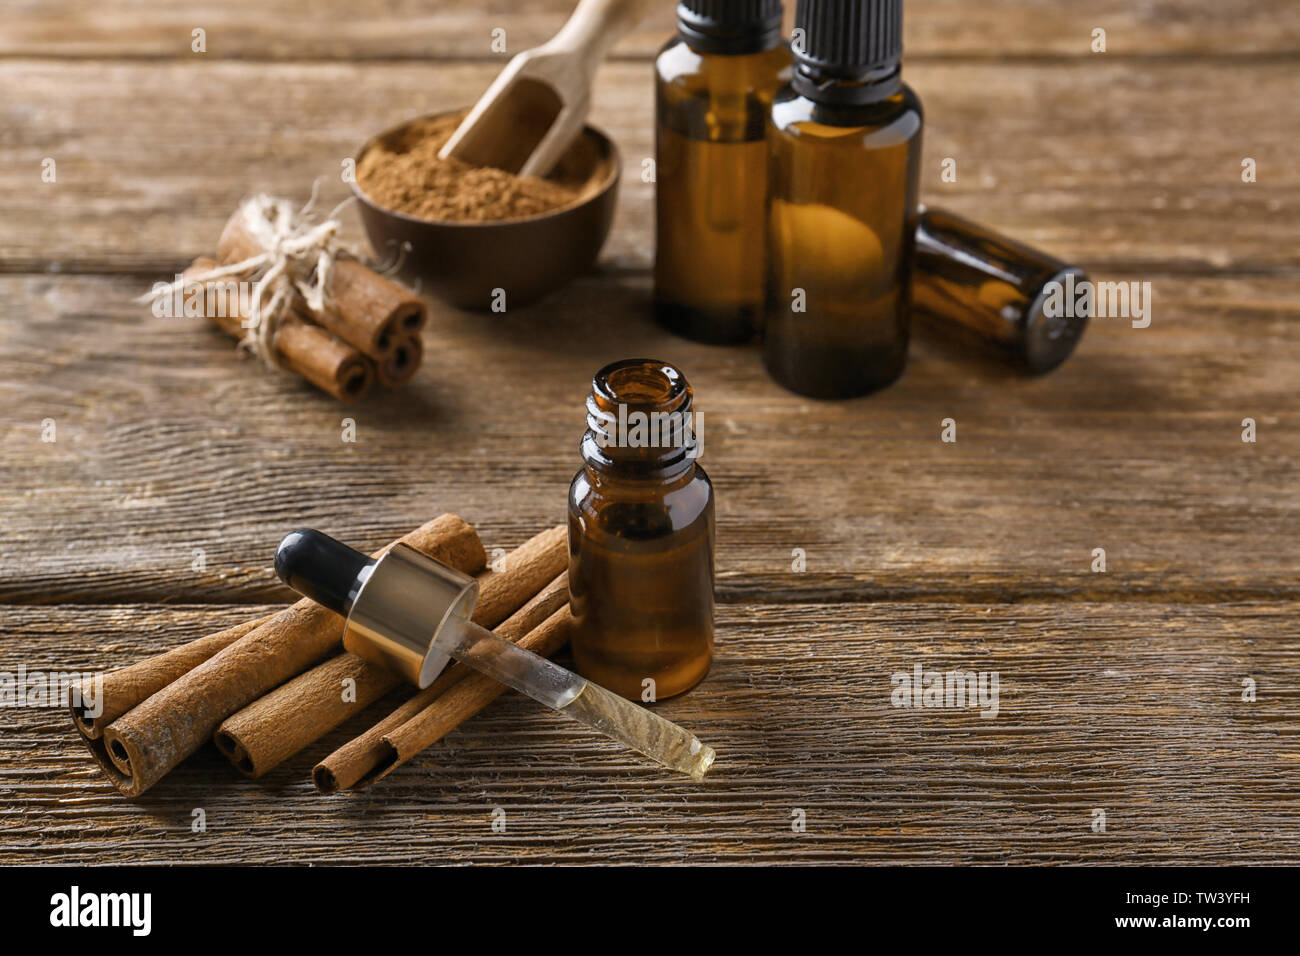 Composition with bottle of cinnamon oil on wooden background Stock Photo